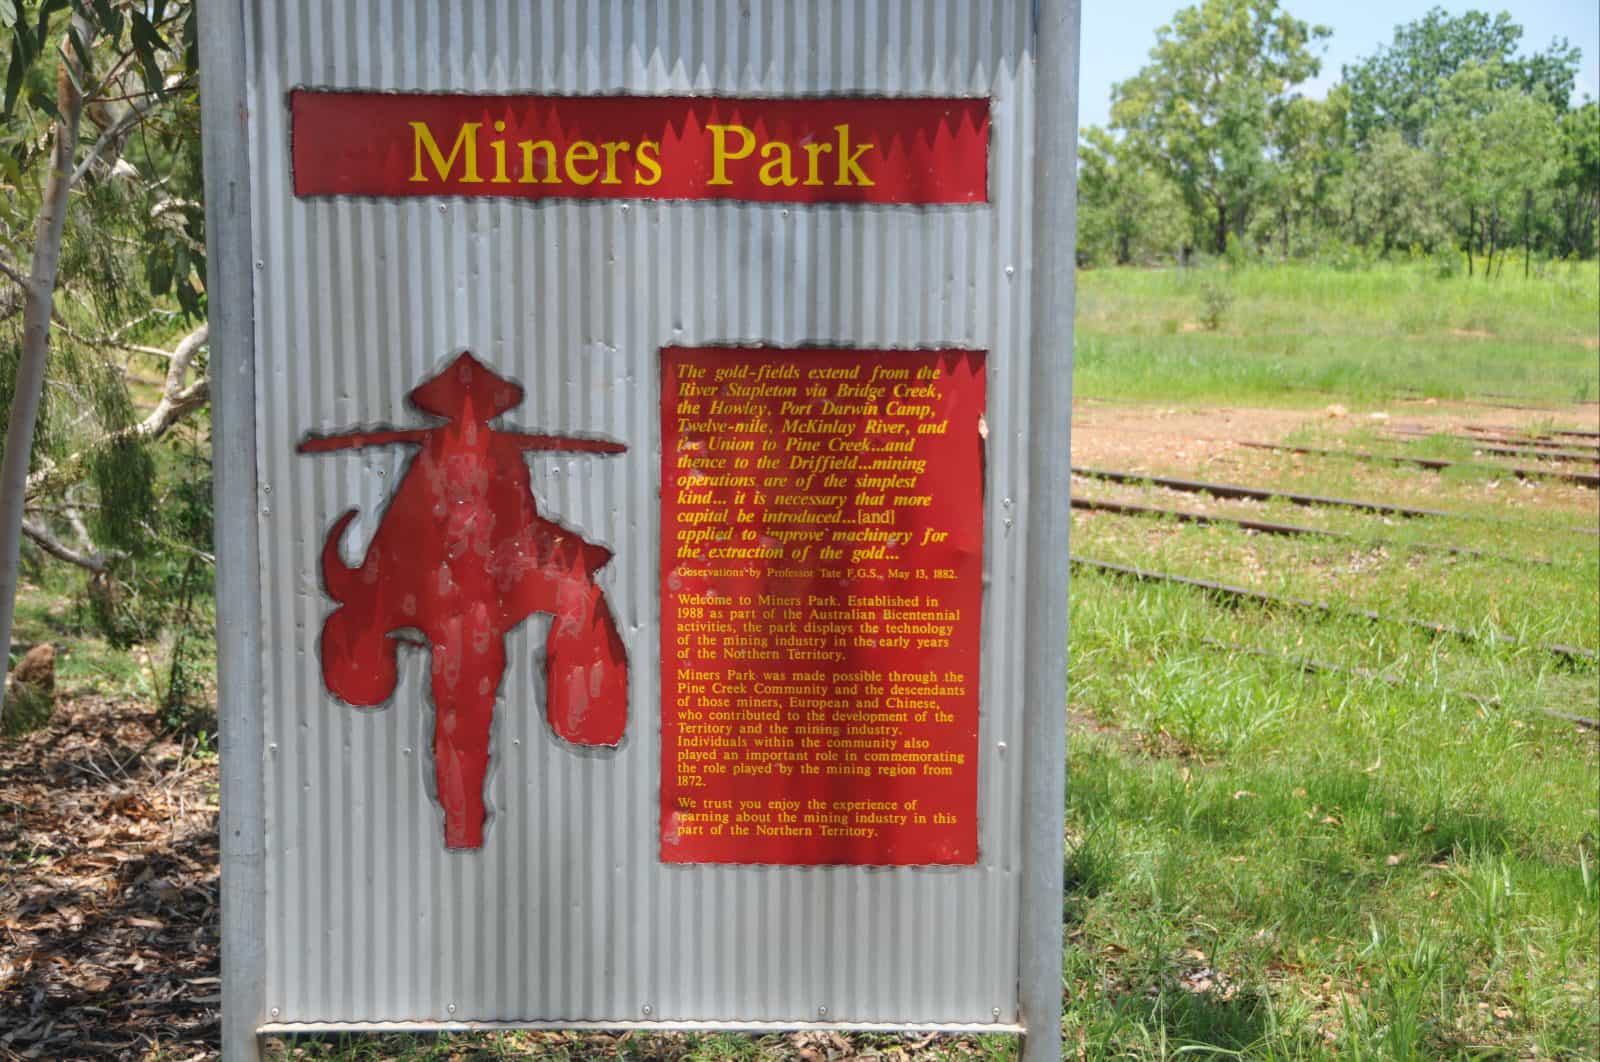 Identification signage at the site.